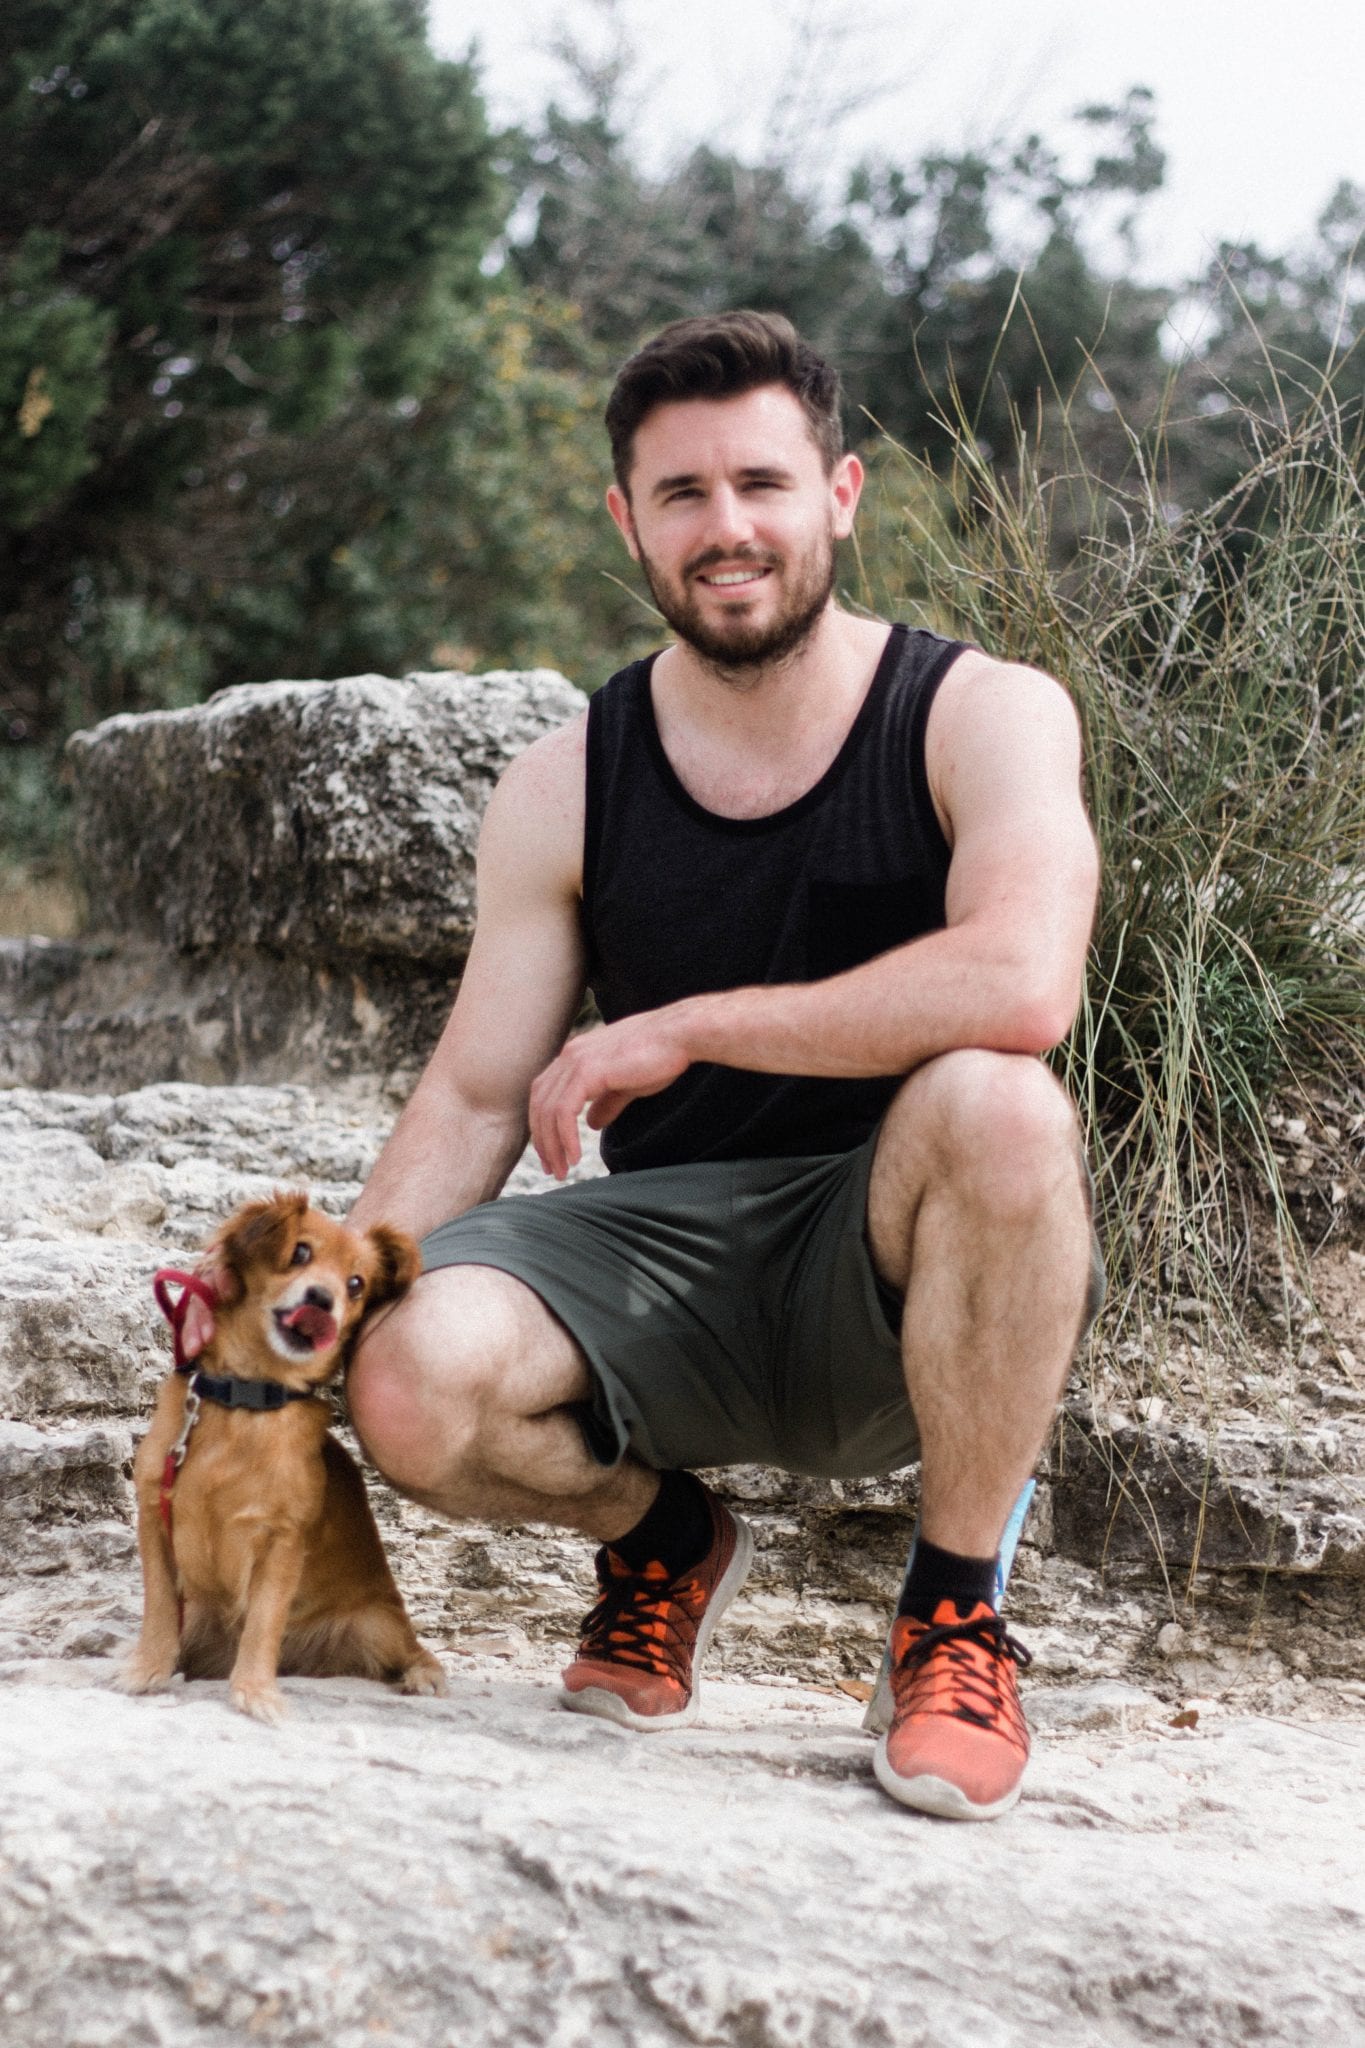 Man and small dog on Mt. Bonnell in Austin Texas